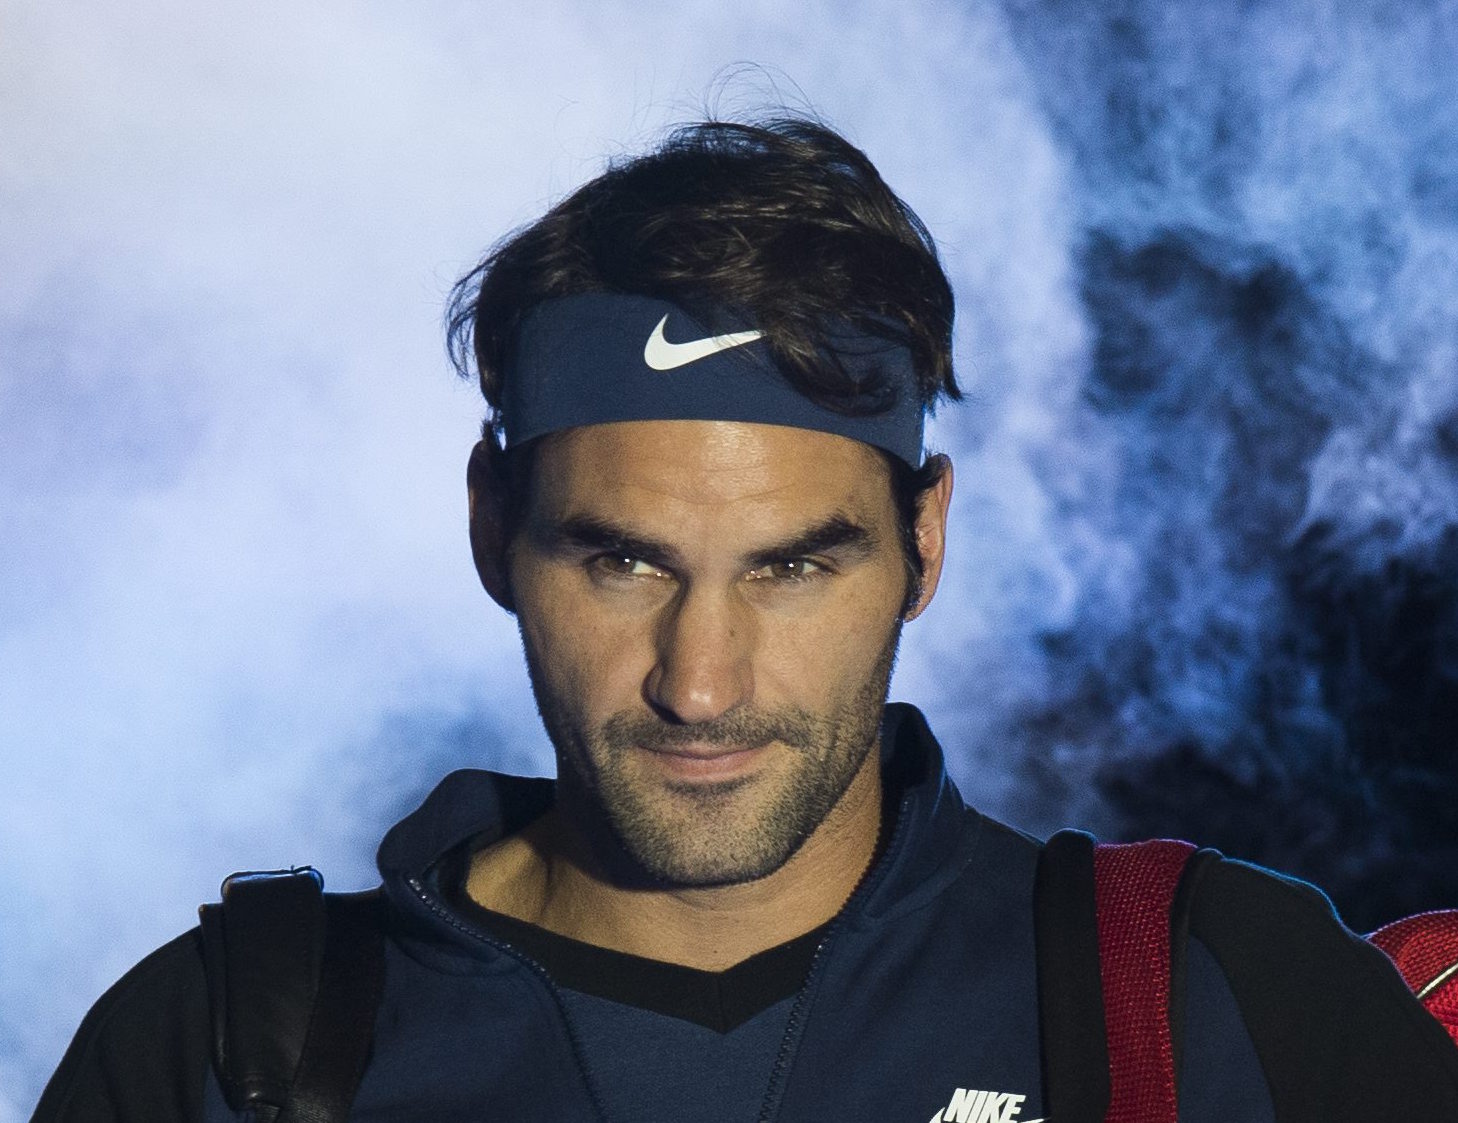 Switzerland's Roger Federer enters the O2 Arena ahead of  his round robin game against Serbia's Novak Djokovic during the ATP World Tour Finals in London, Britain, 17 November 2015. 